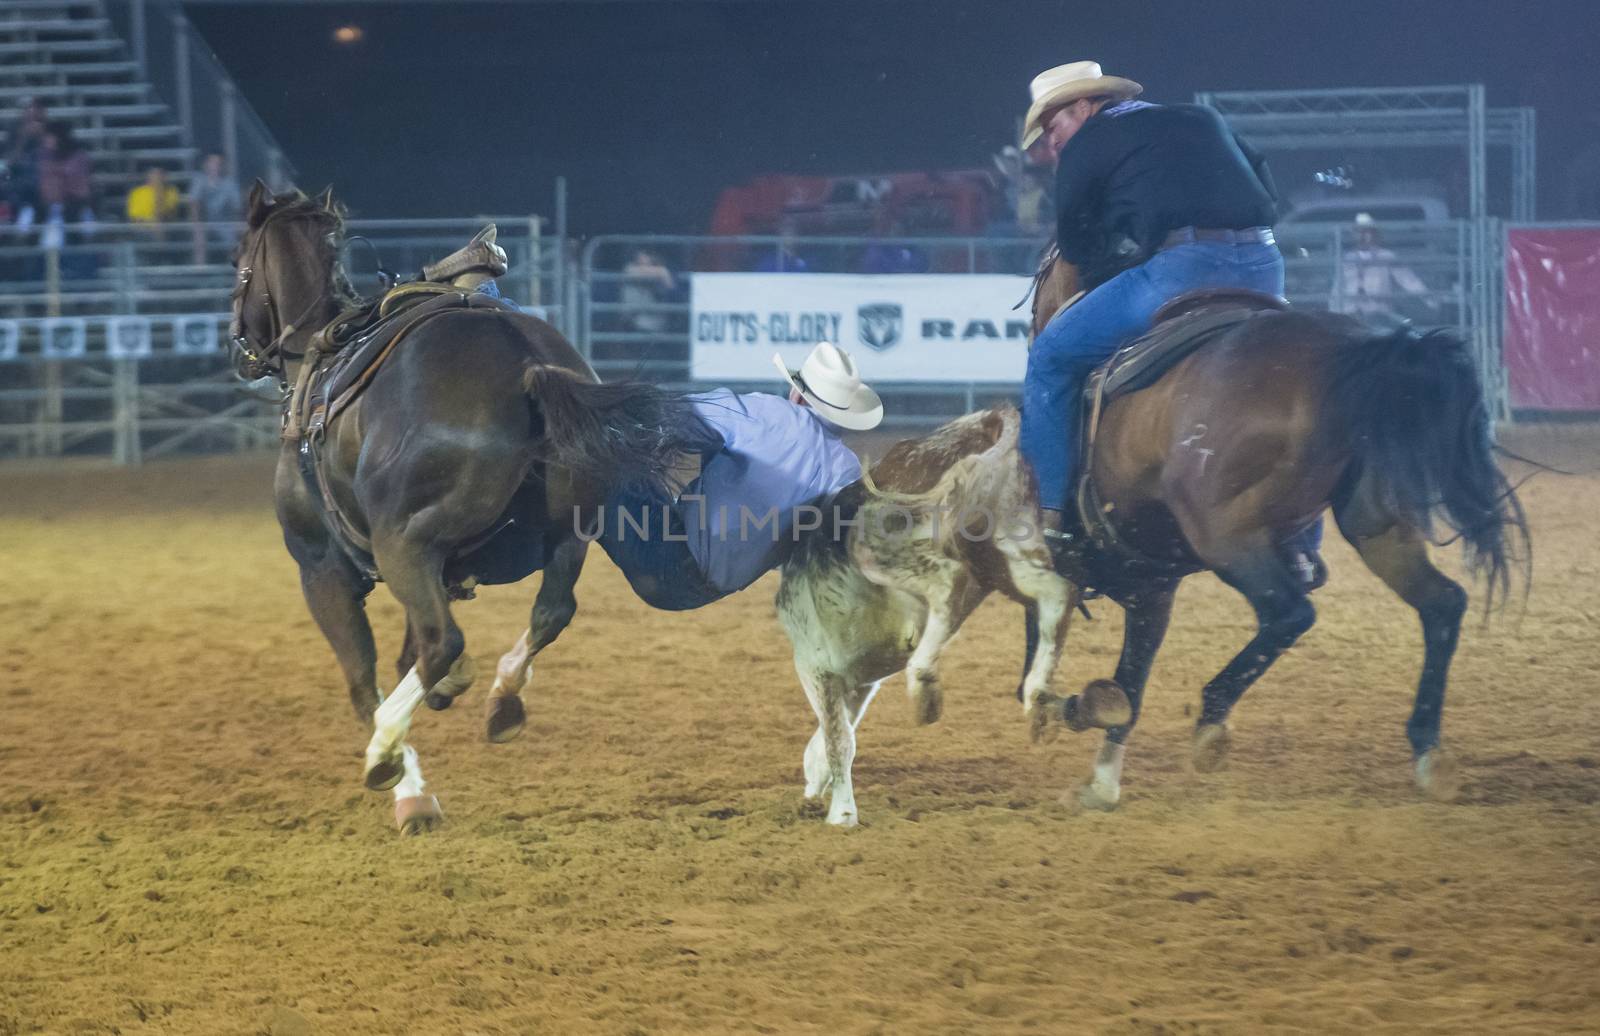 LOGANDALE , NEVADA - APRIL 10 : Cowboy Participating in a Steer wrestling Competition at the Clark County Fair and Rodeo a Professional Rodeo held in Logandale Nevada , USA on April 10 2014 